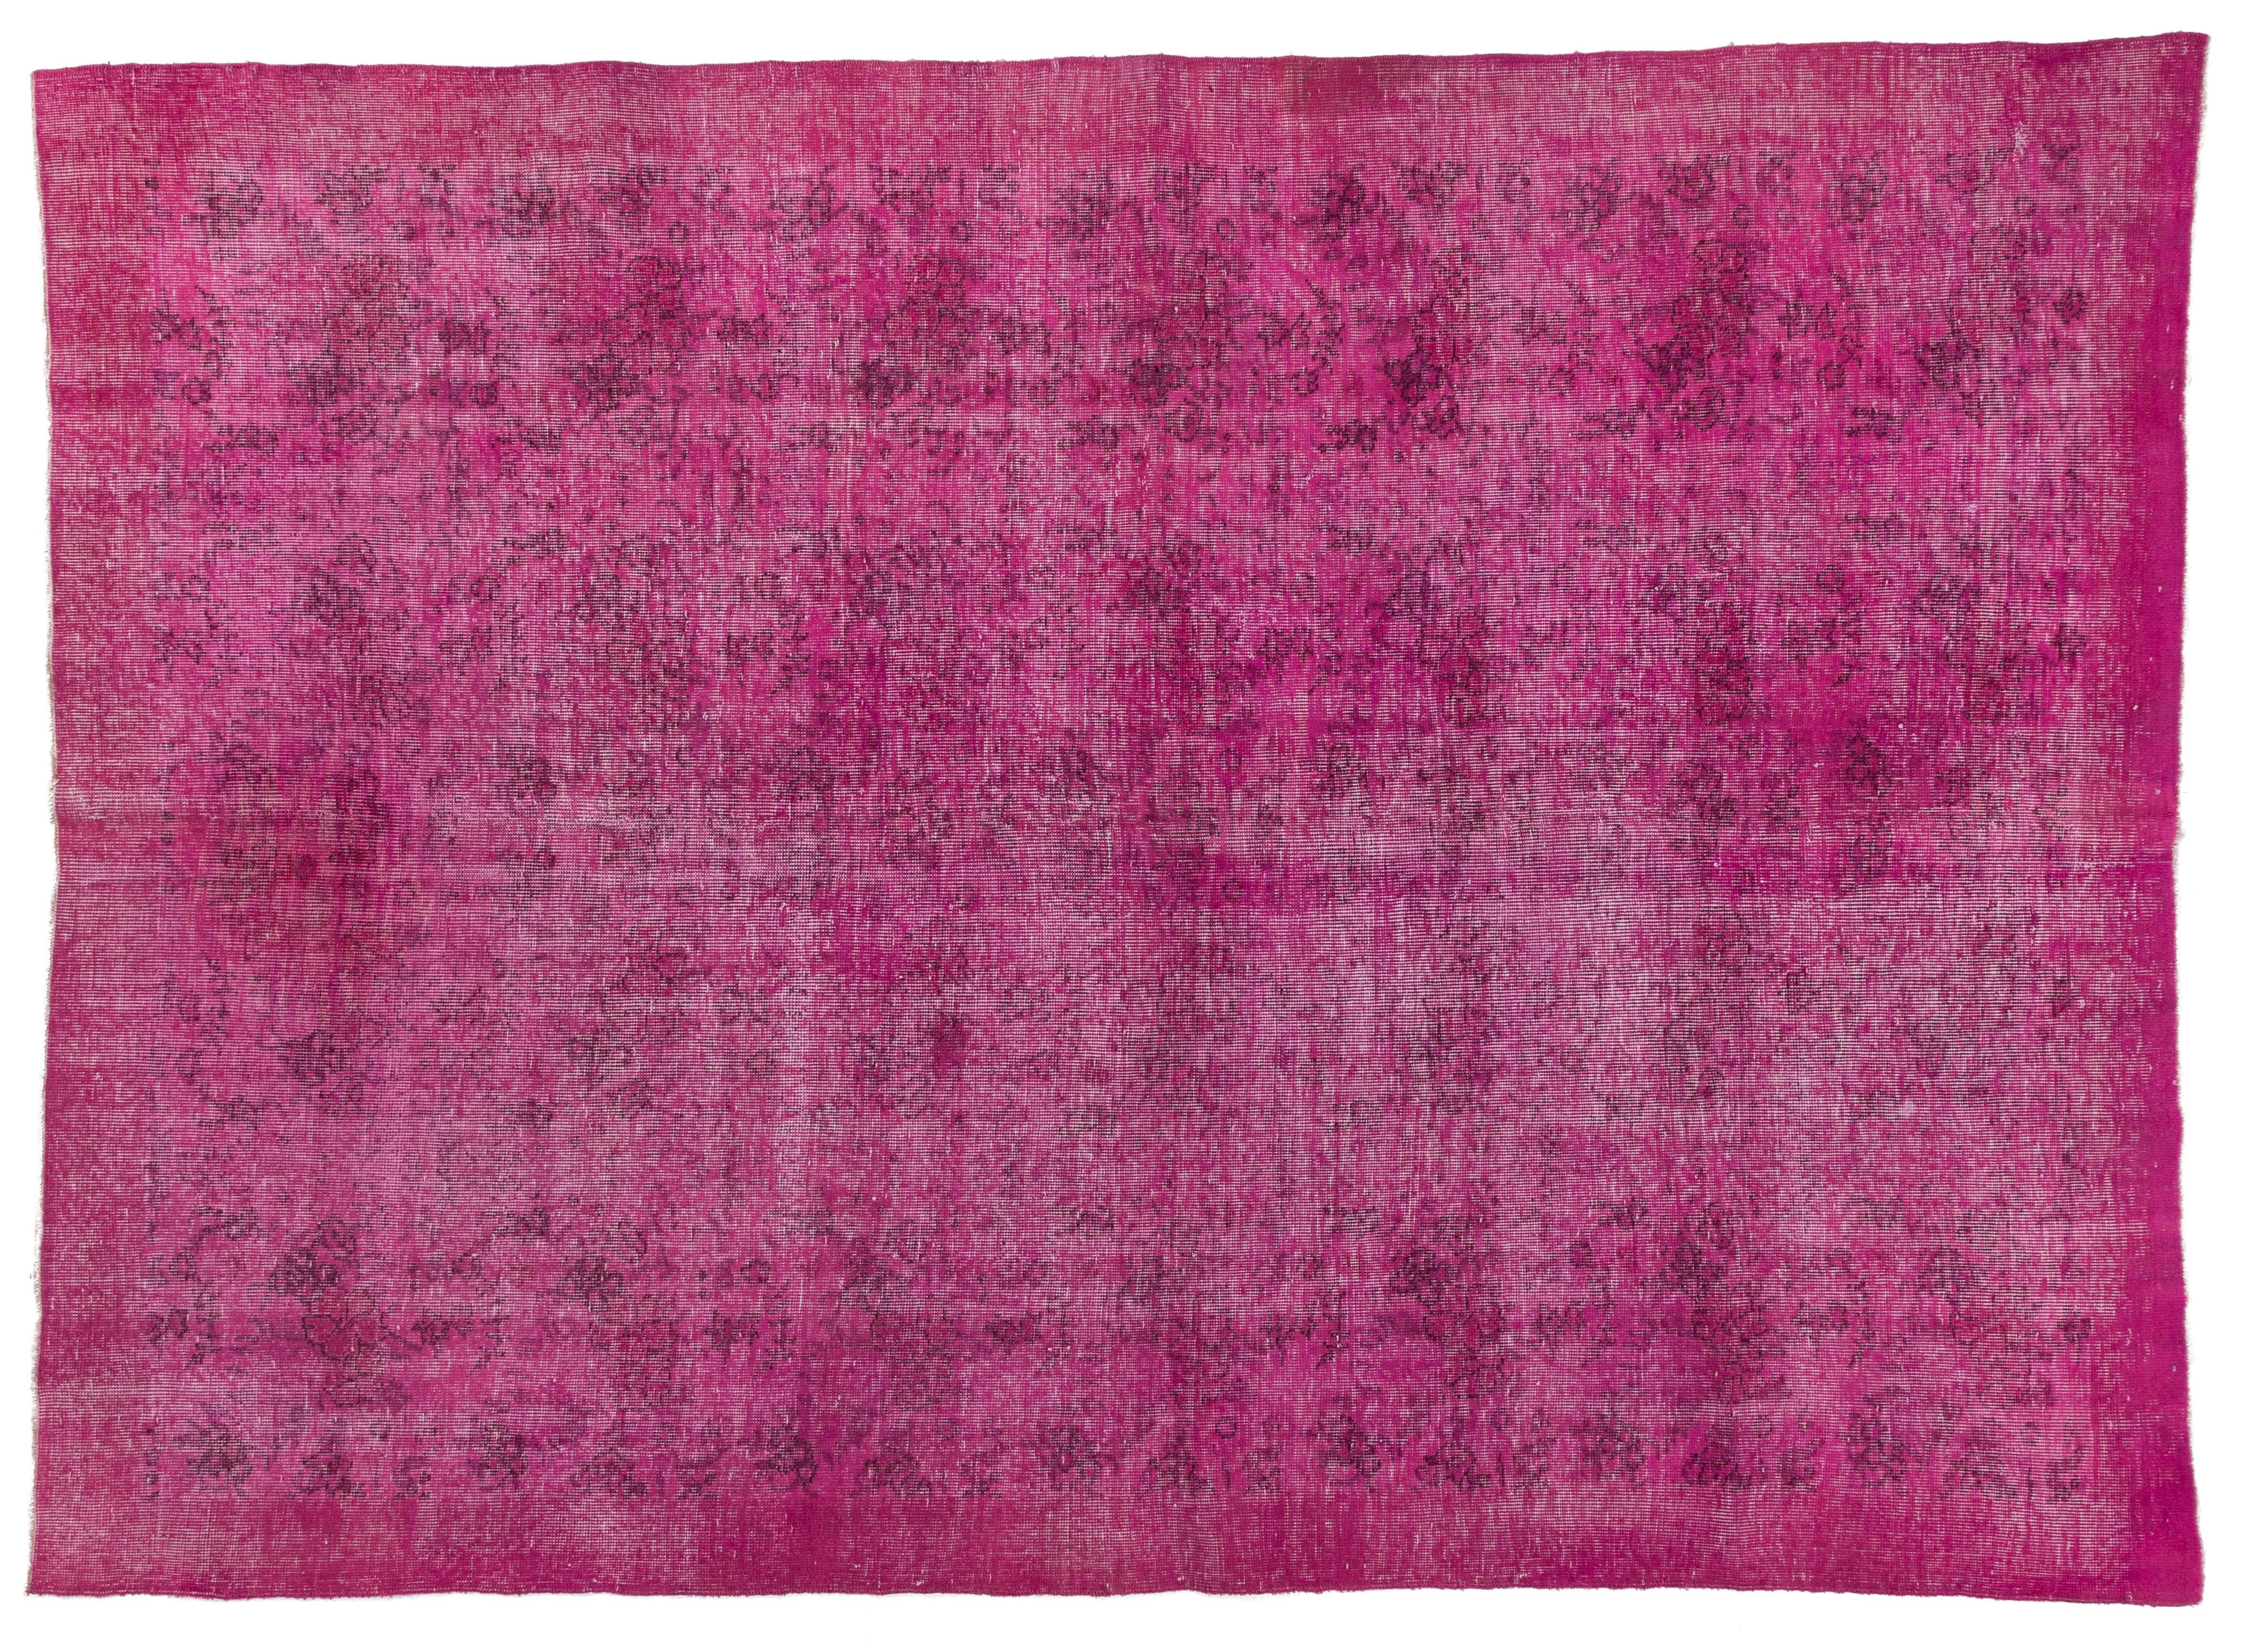 Hand-Woven Vintage Handmade Turkish Wool Rug Over-dyed in Pink Color